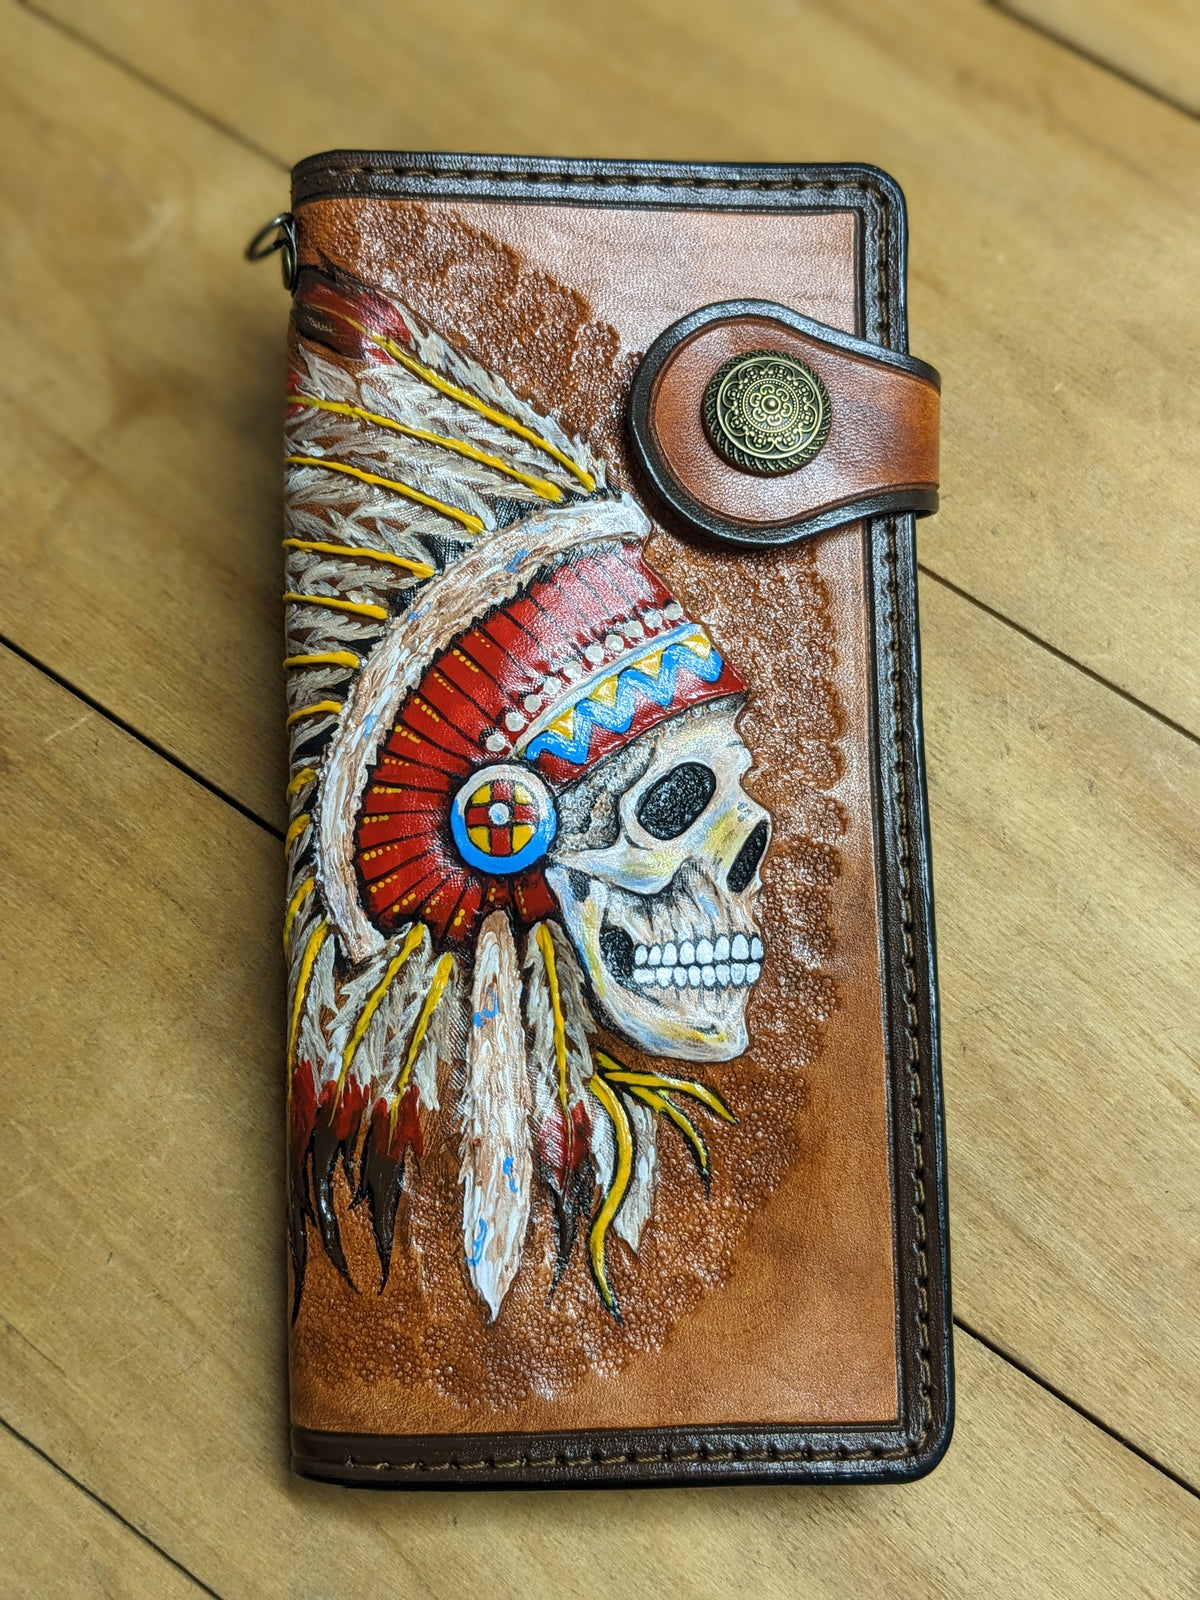 S3, Indian Skull, Native American Chief, Red Man, Apache Skull